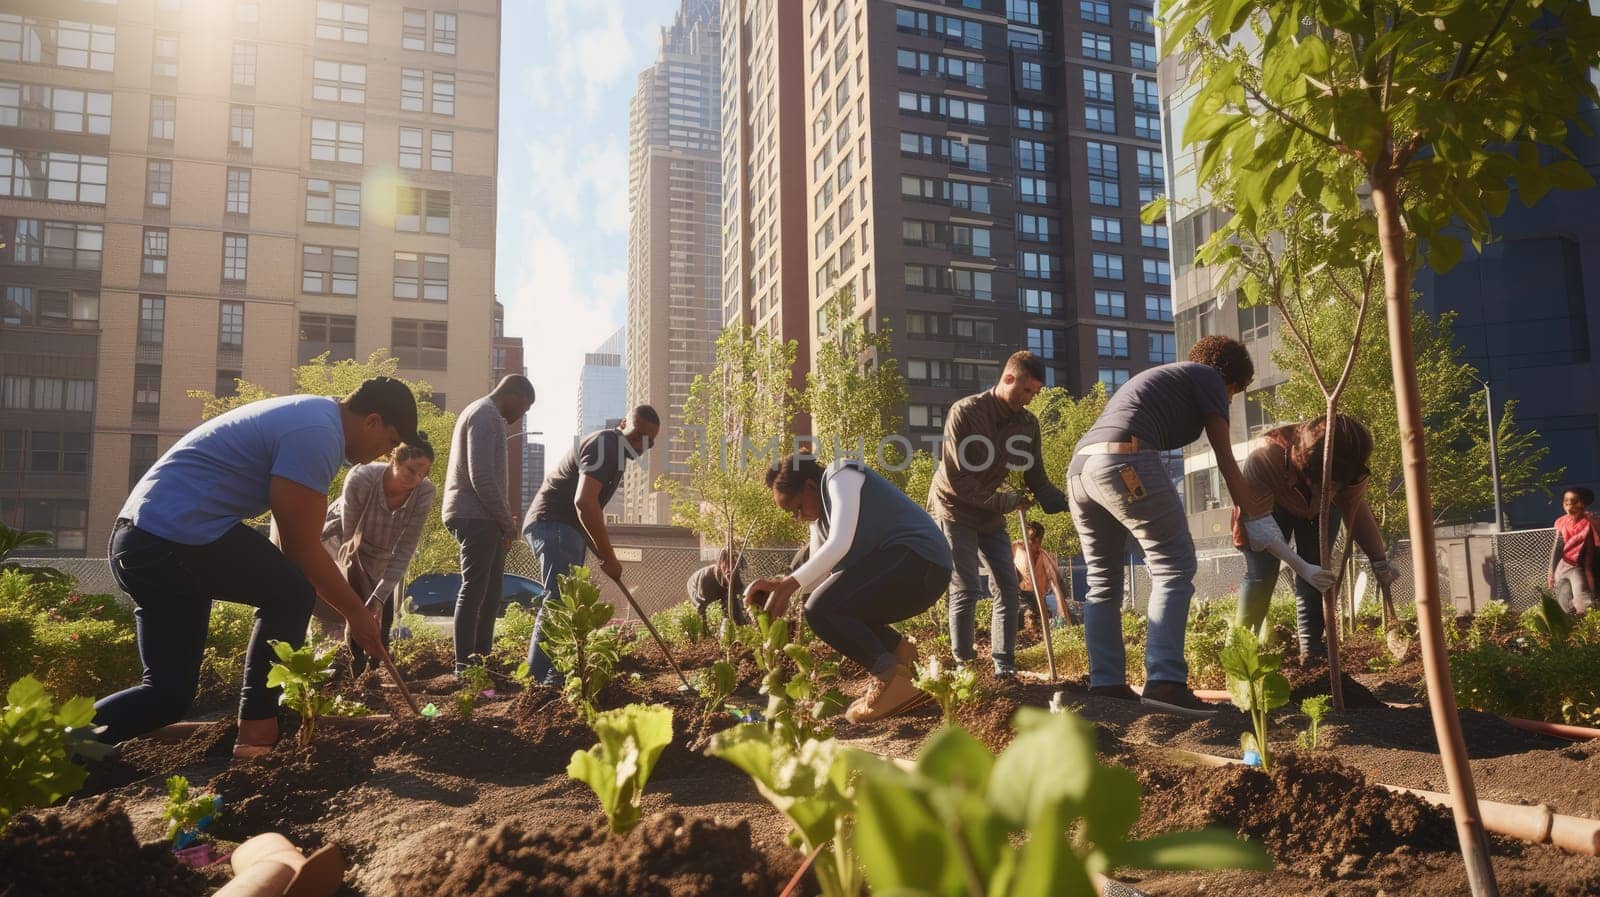 A group of people is tending to plants, shrubs, and trees in a garden, with city buildings visible in the background. AIG41